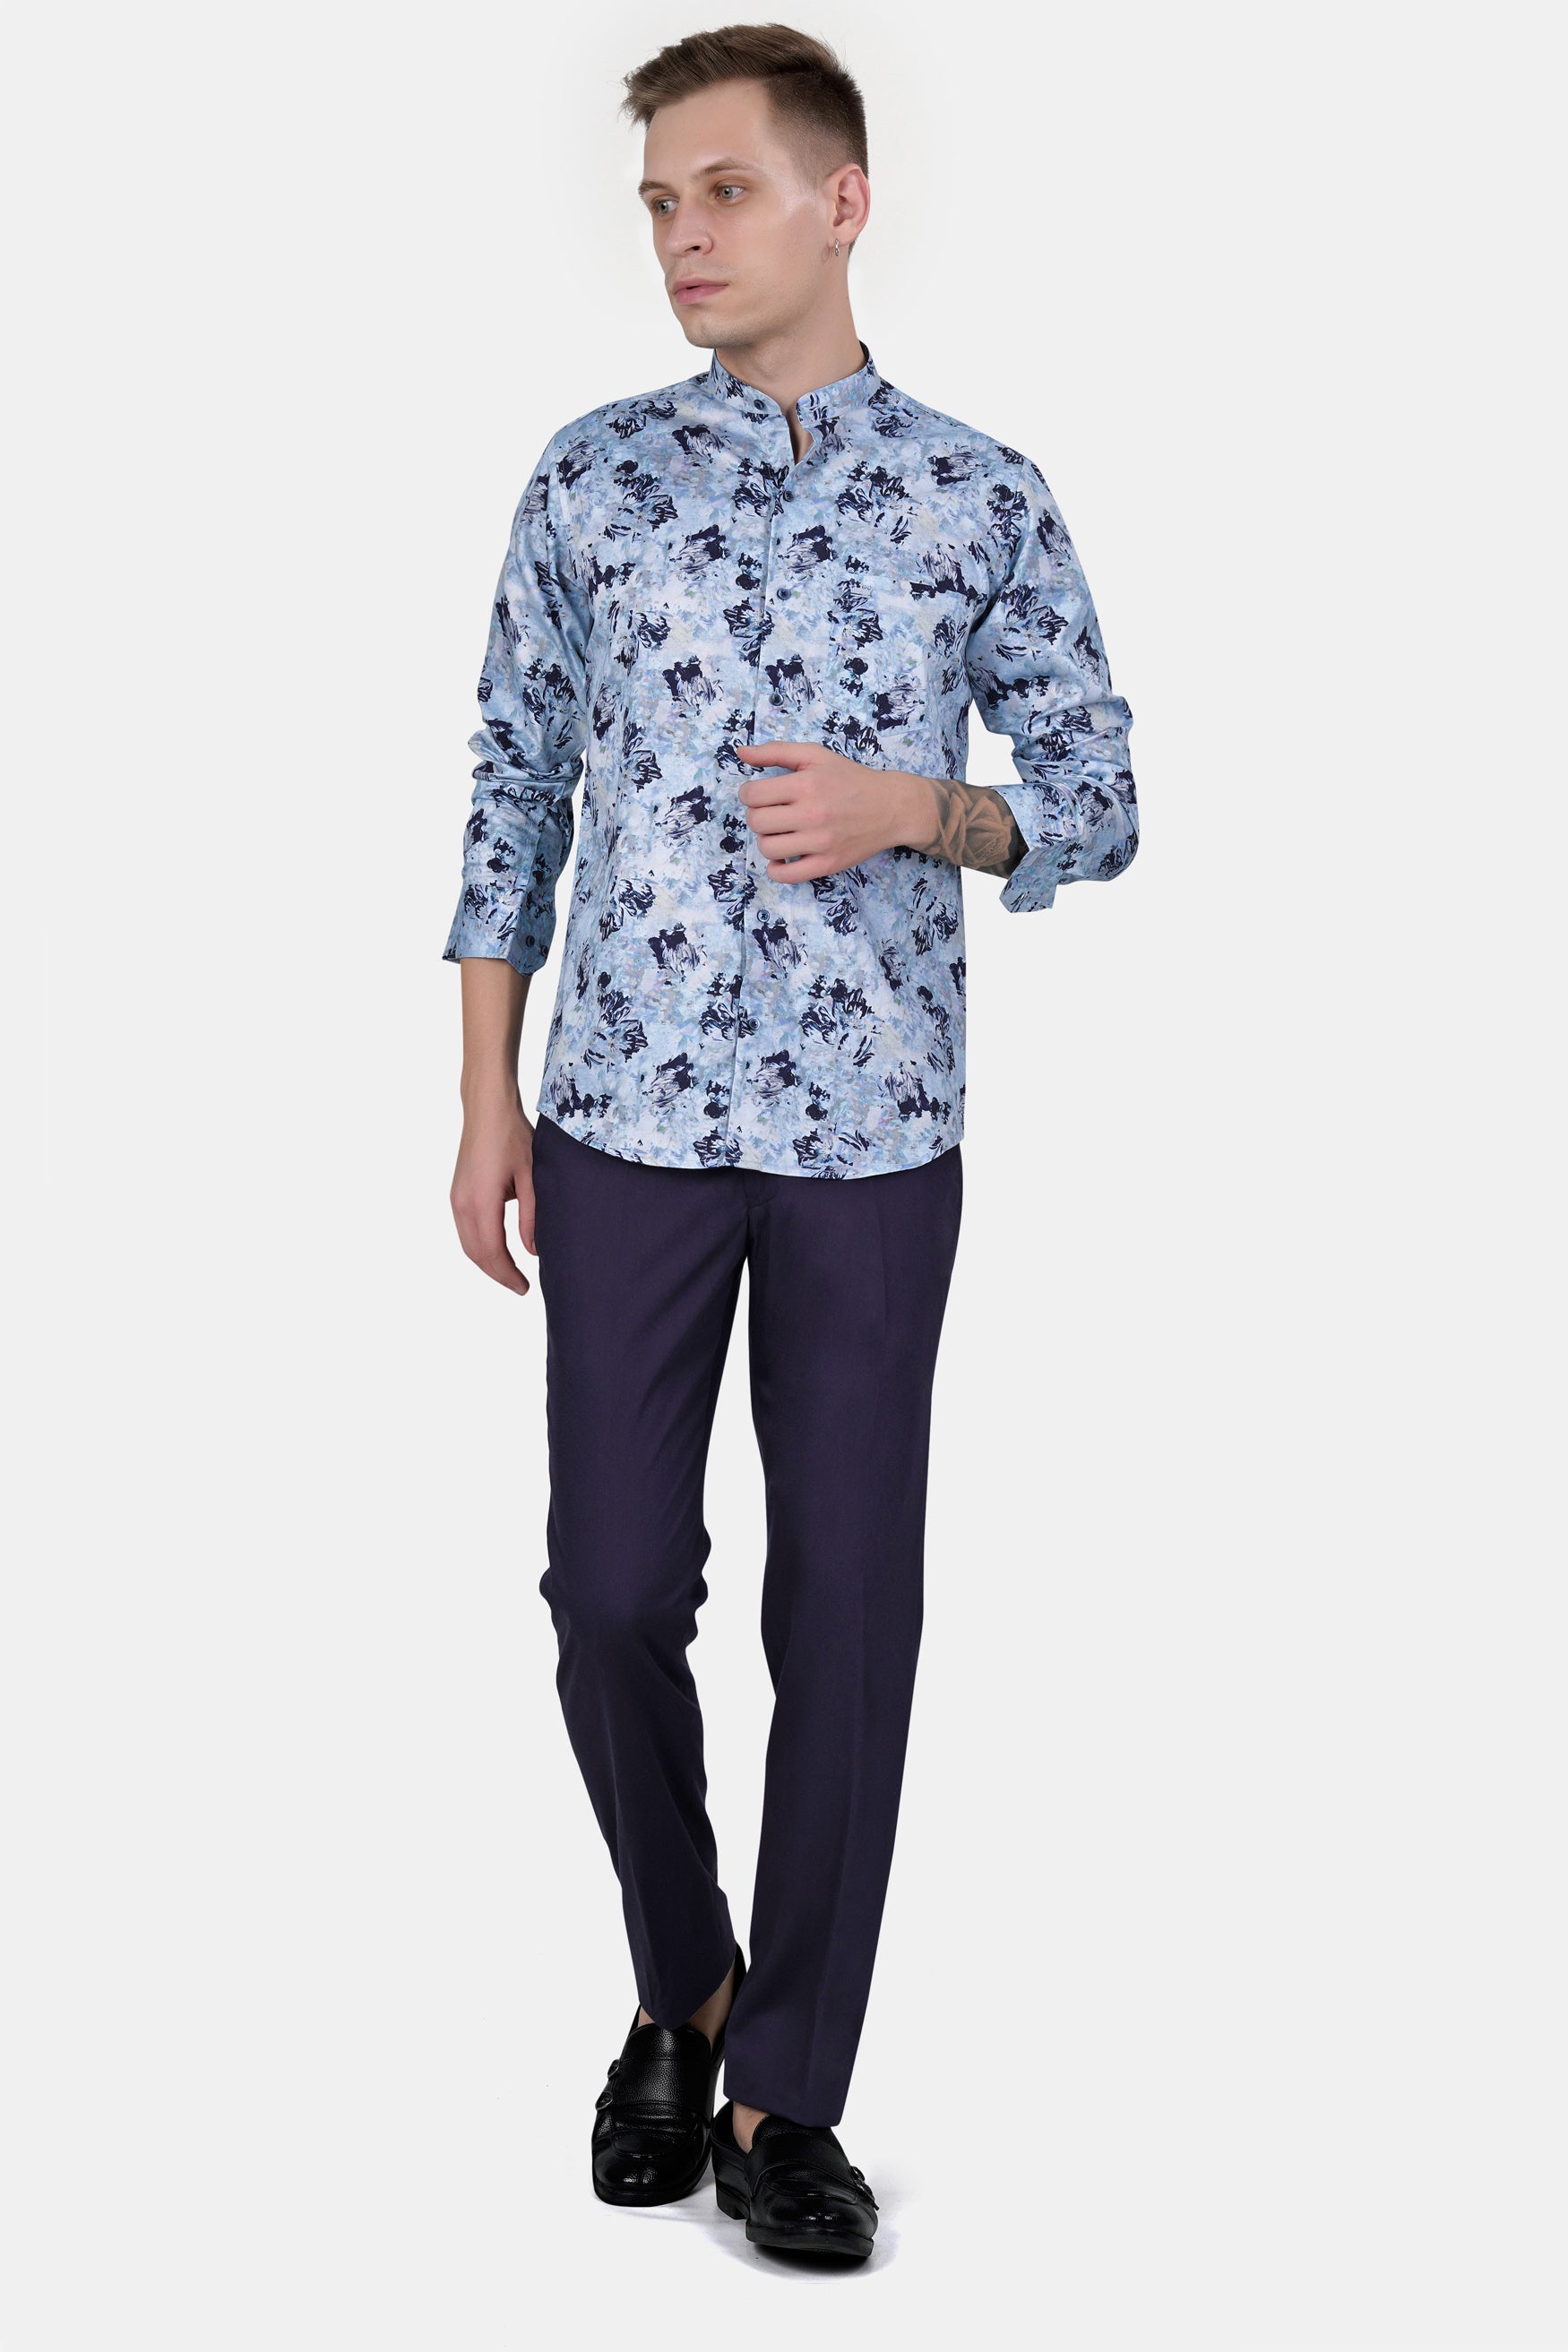 Bright White and Downriver Blue Abstract Printed Subtle Sheen Super Soft Premium Cotton Shirt